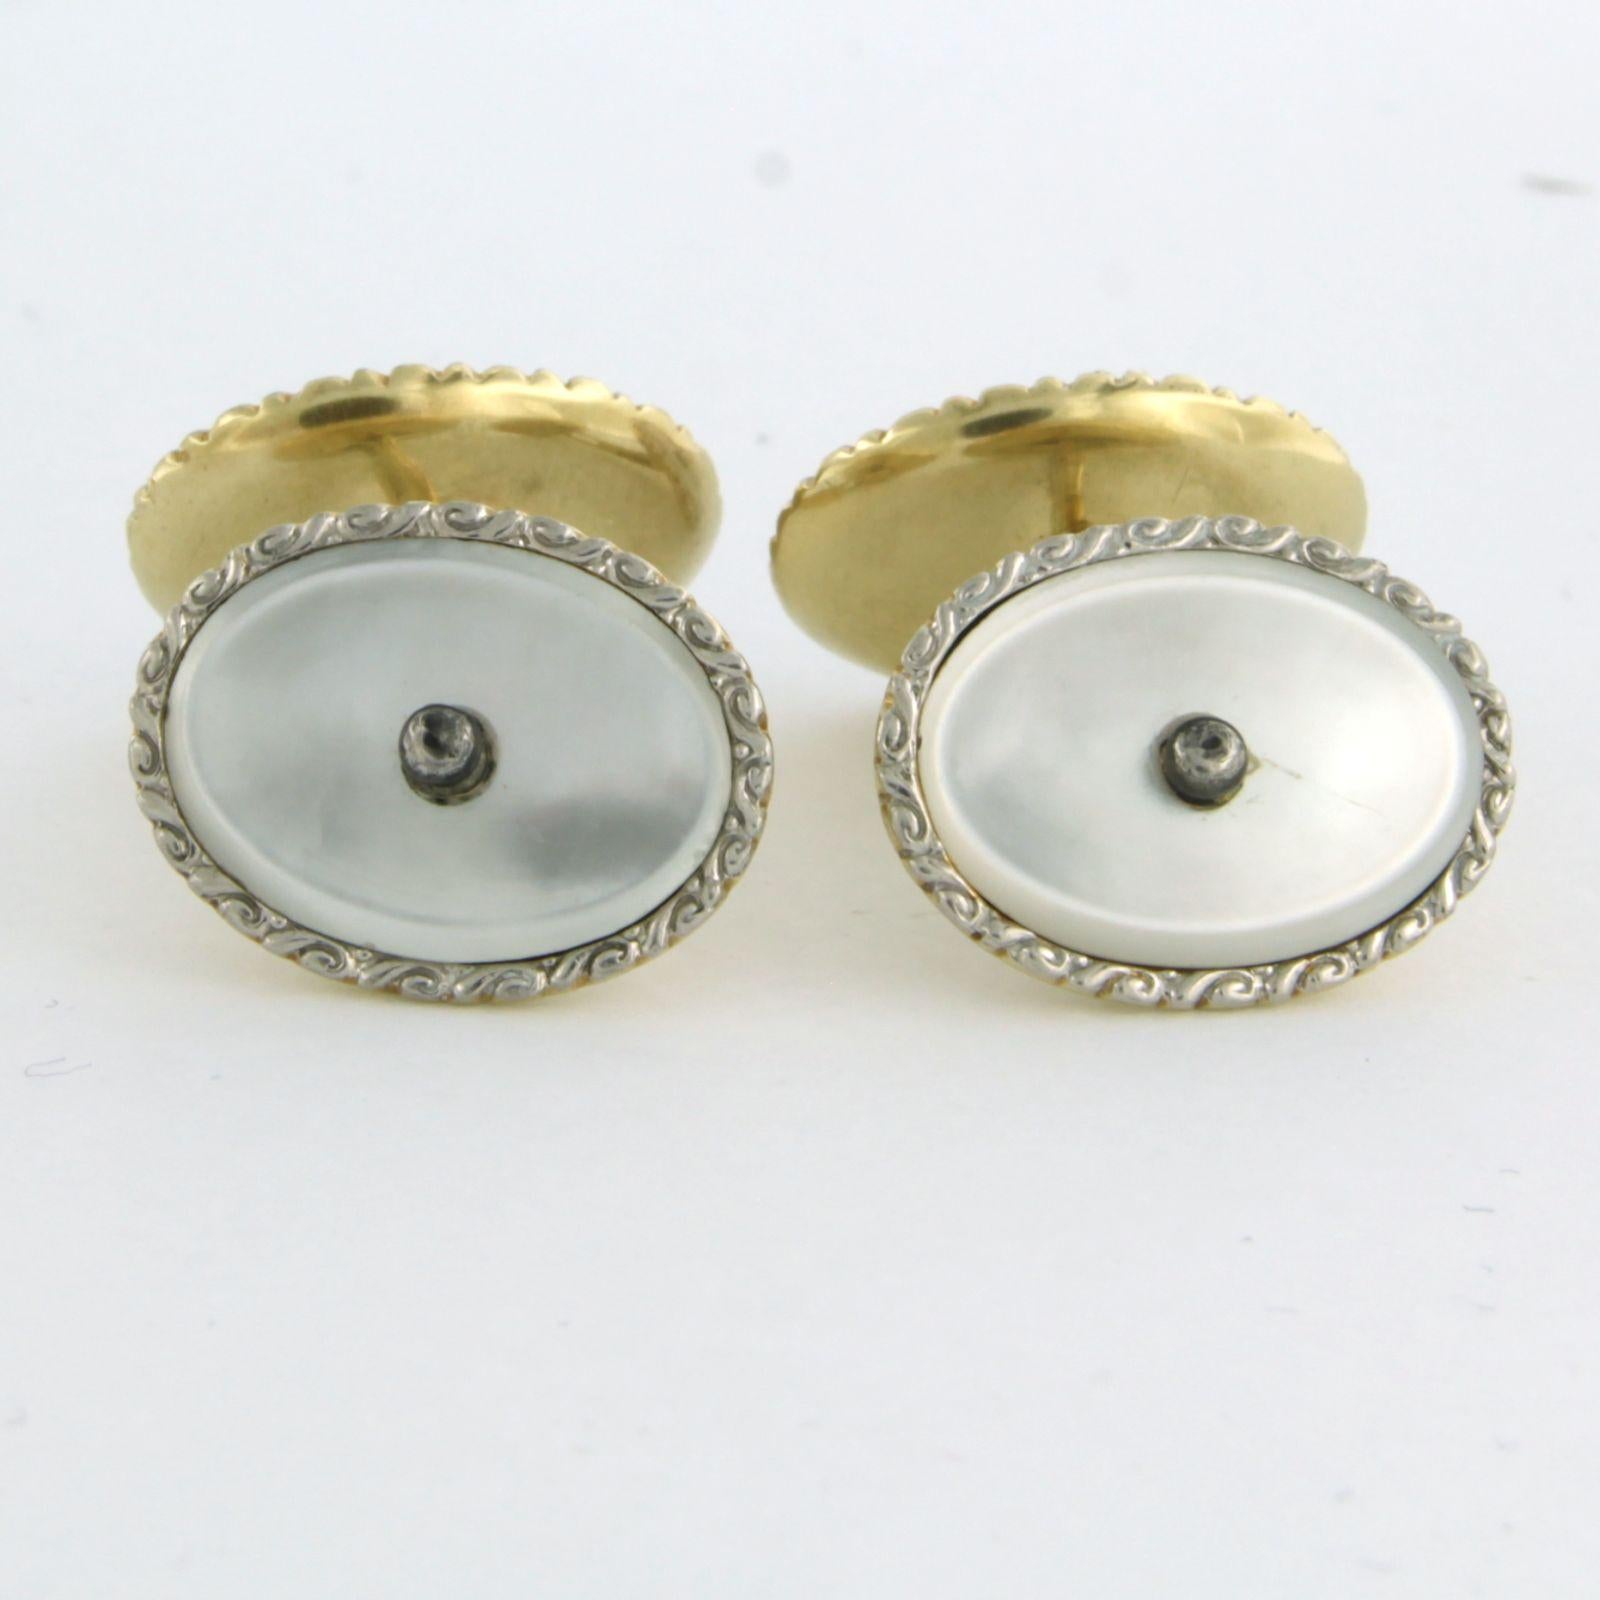 Early Victorian 14k bicolour gold cufflinks set with mother of pearl and pearls – in case For Sale